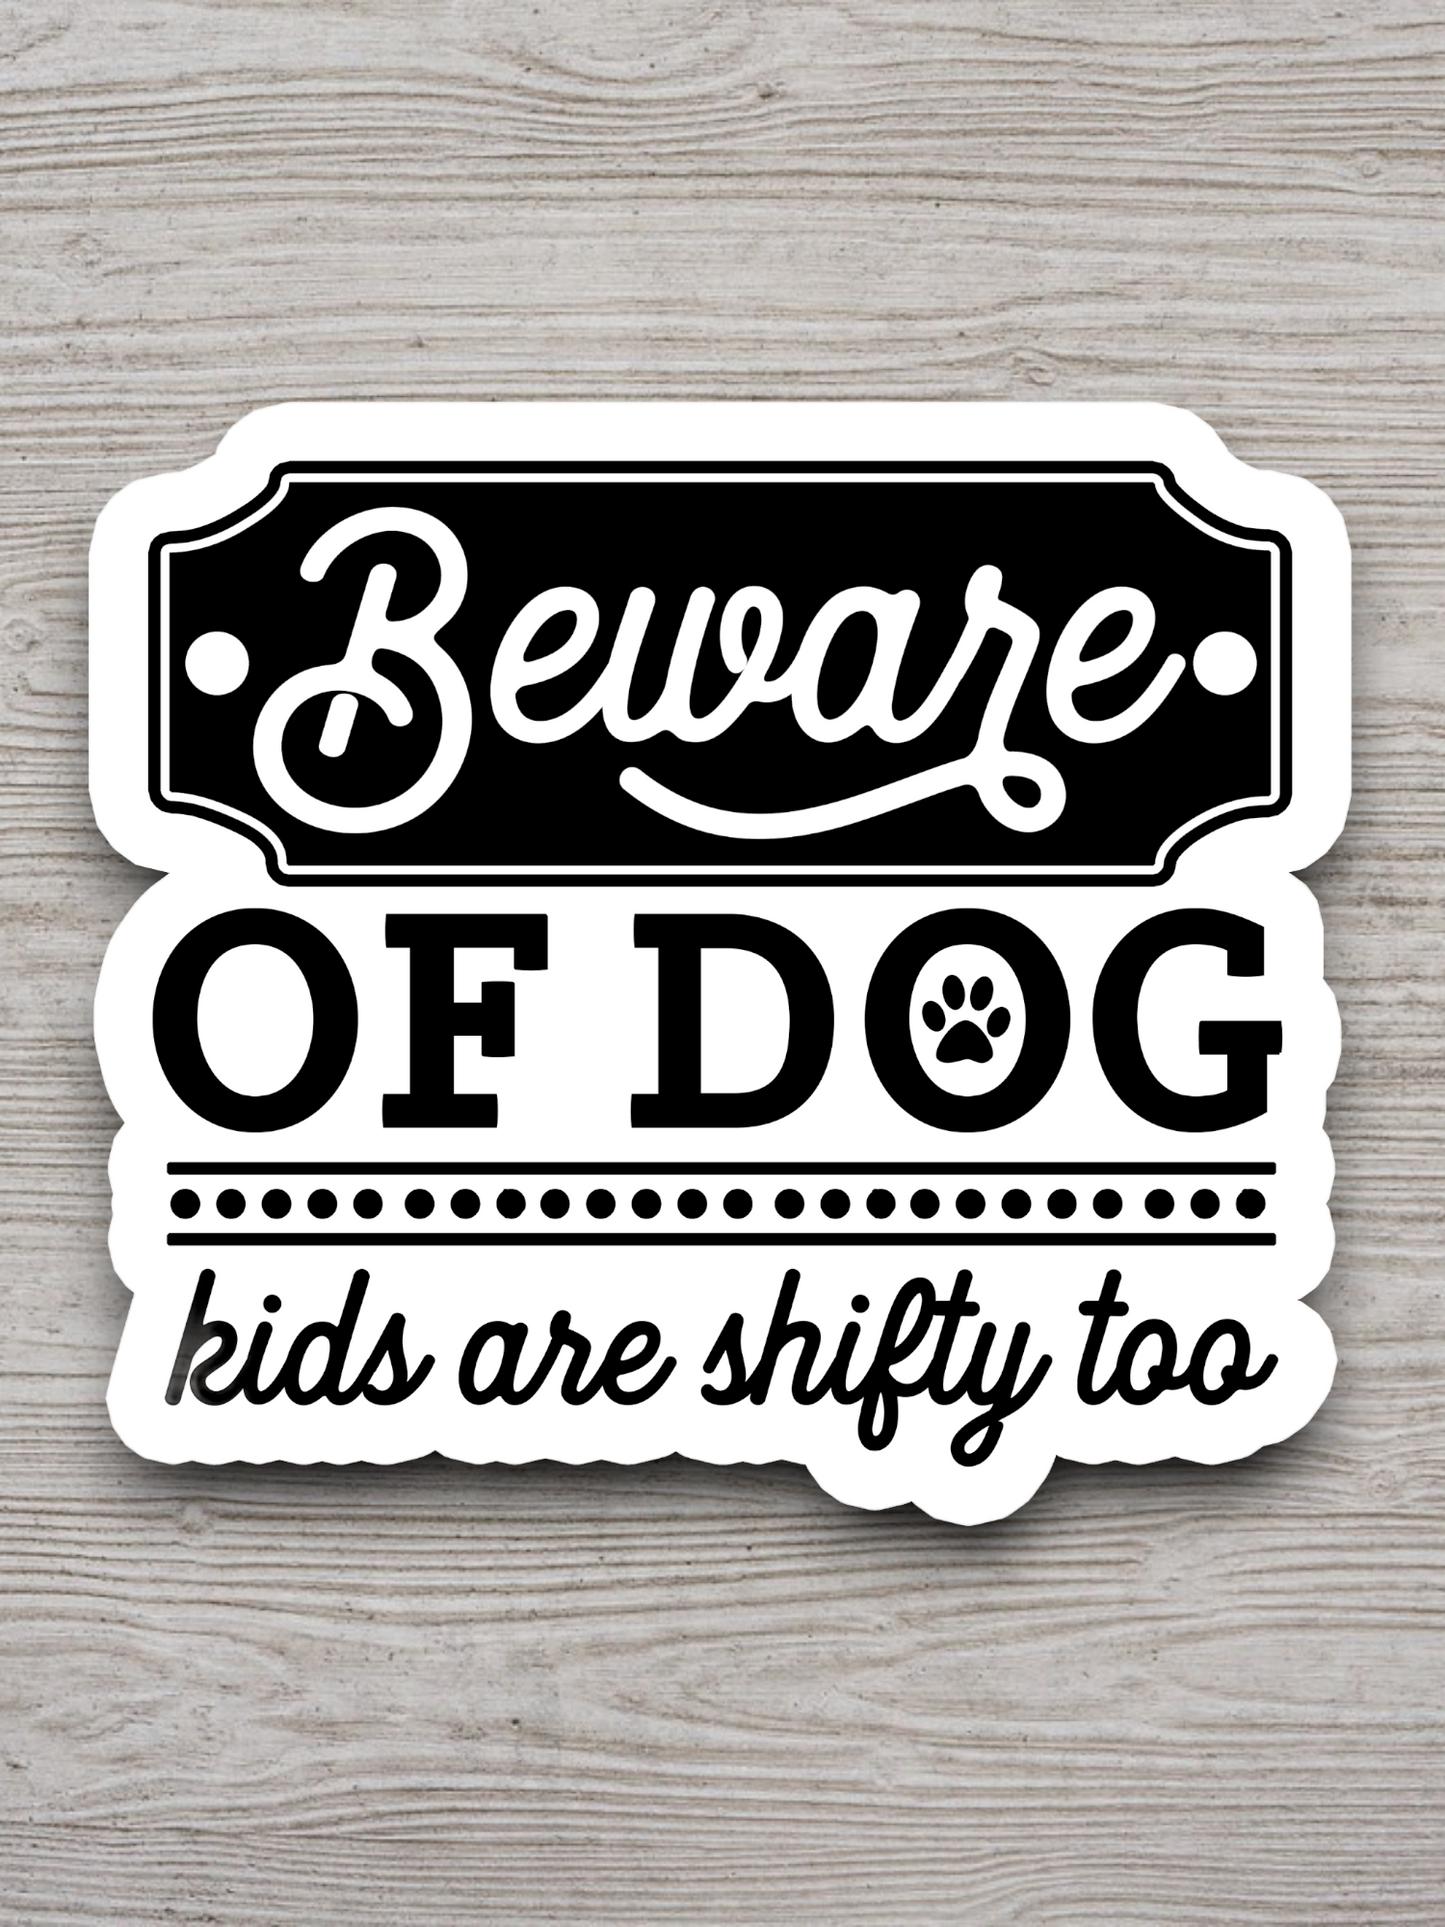 Beware Of Dog Kids Are Shifty Too Sticker